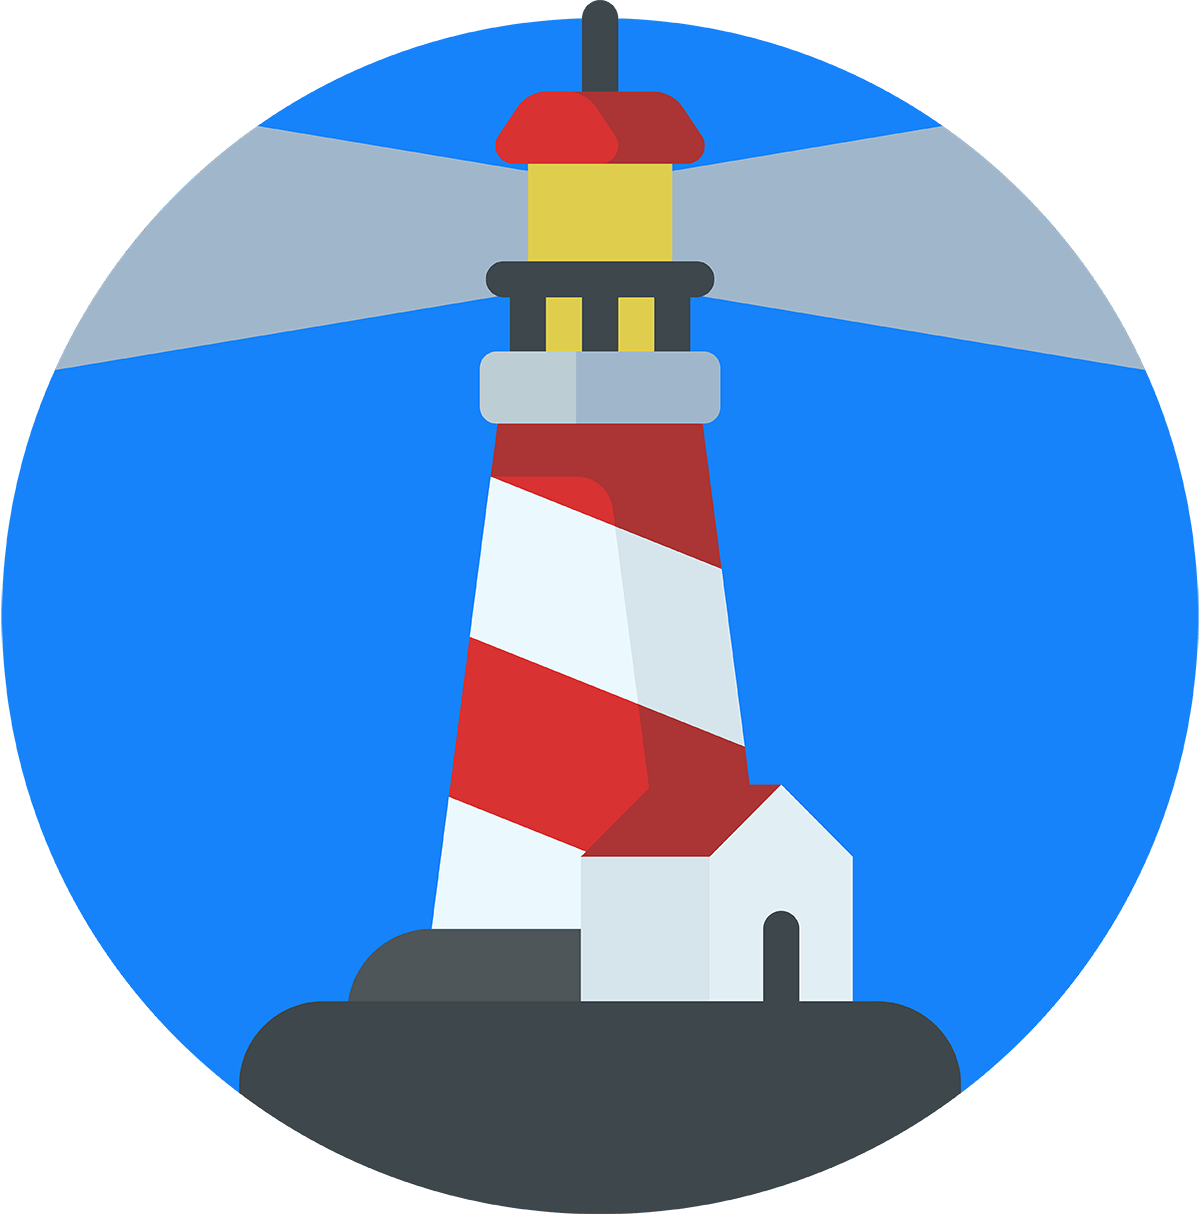 Lighthouse clipart wave. Voyager the missing laravel